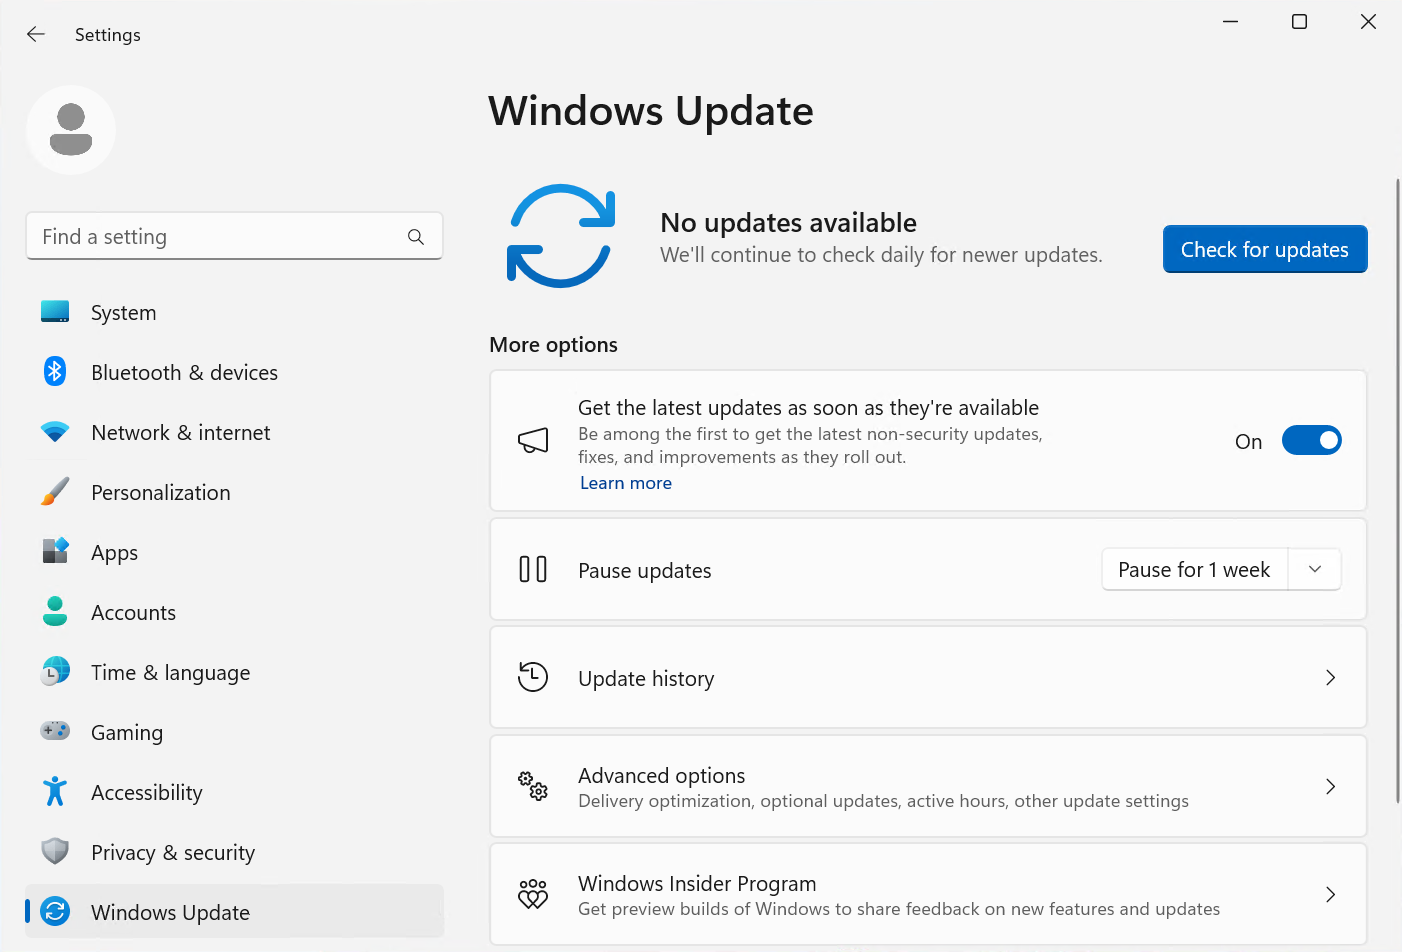 Update manually: If automatic updates are not functioning correctly, manually check for updates in your device settings and install any available updates.
Run Windows Update Troubleshooter: Utilize the built-in Windows Update Troubleshooter tool to automatically detect and resolve any issues related to Windows updates.